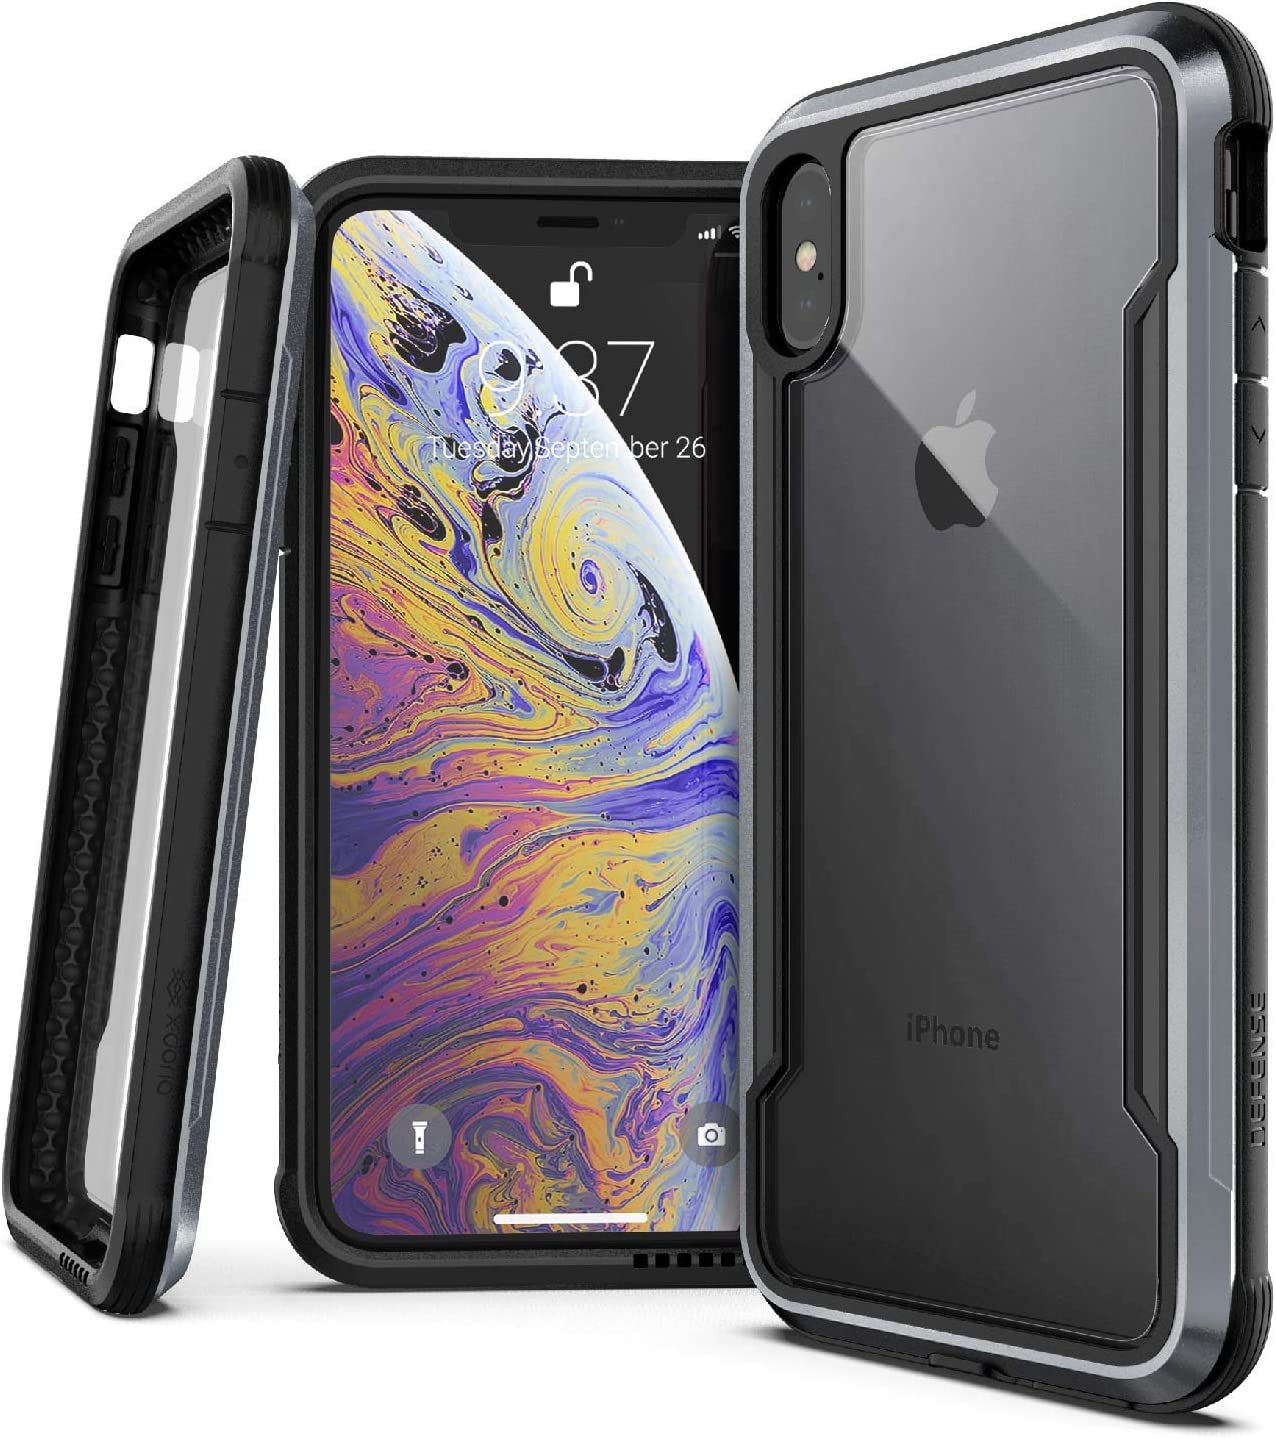 X-Doria Defense Shield Phone Cover for iPhone Xs Max Black RRP £9.99 CLEARANCE XL £6.99